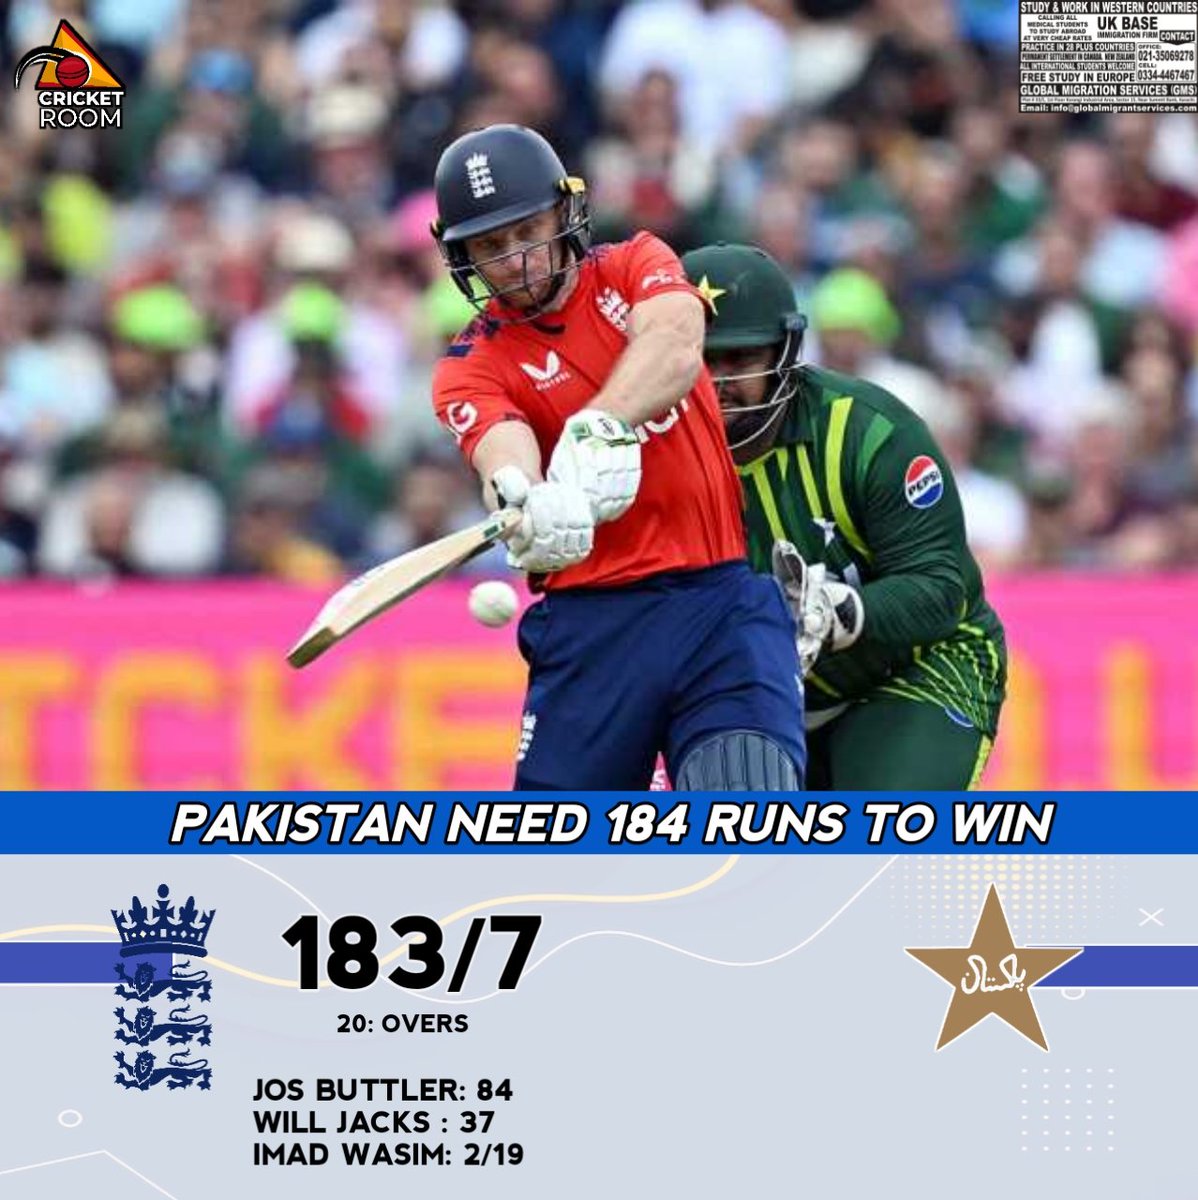 Pakistan need 184 runs to win the match against England. #Cricket #CricketRoom #Pakistan #PakistanCricketTeam #T20WorldCup #PAKvENG